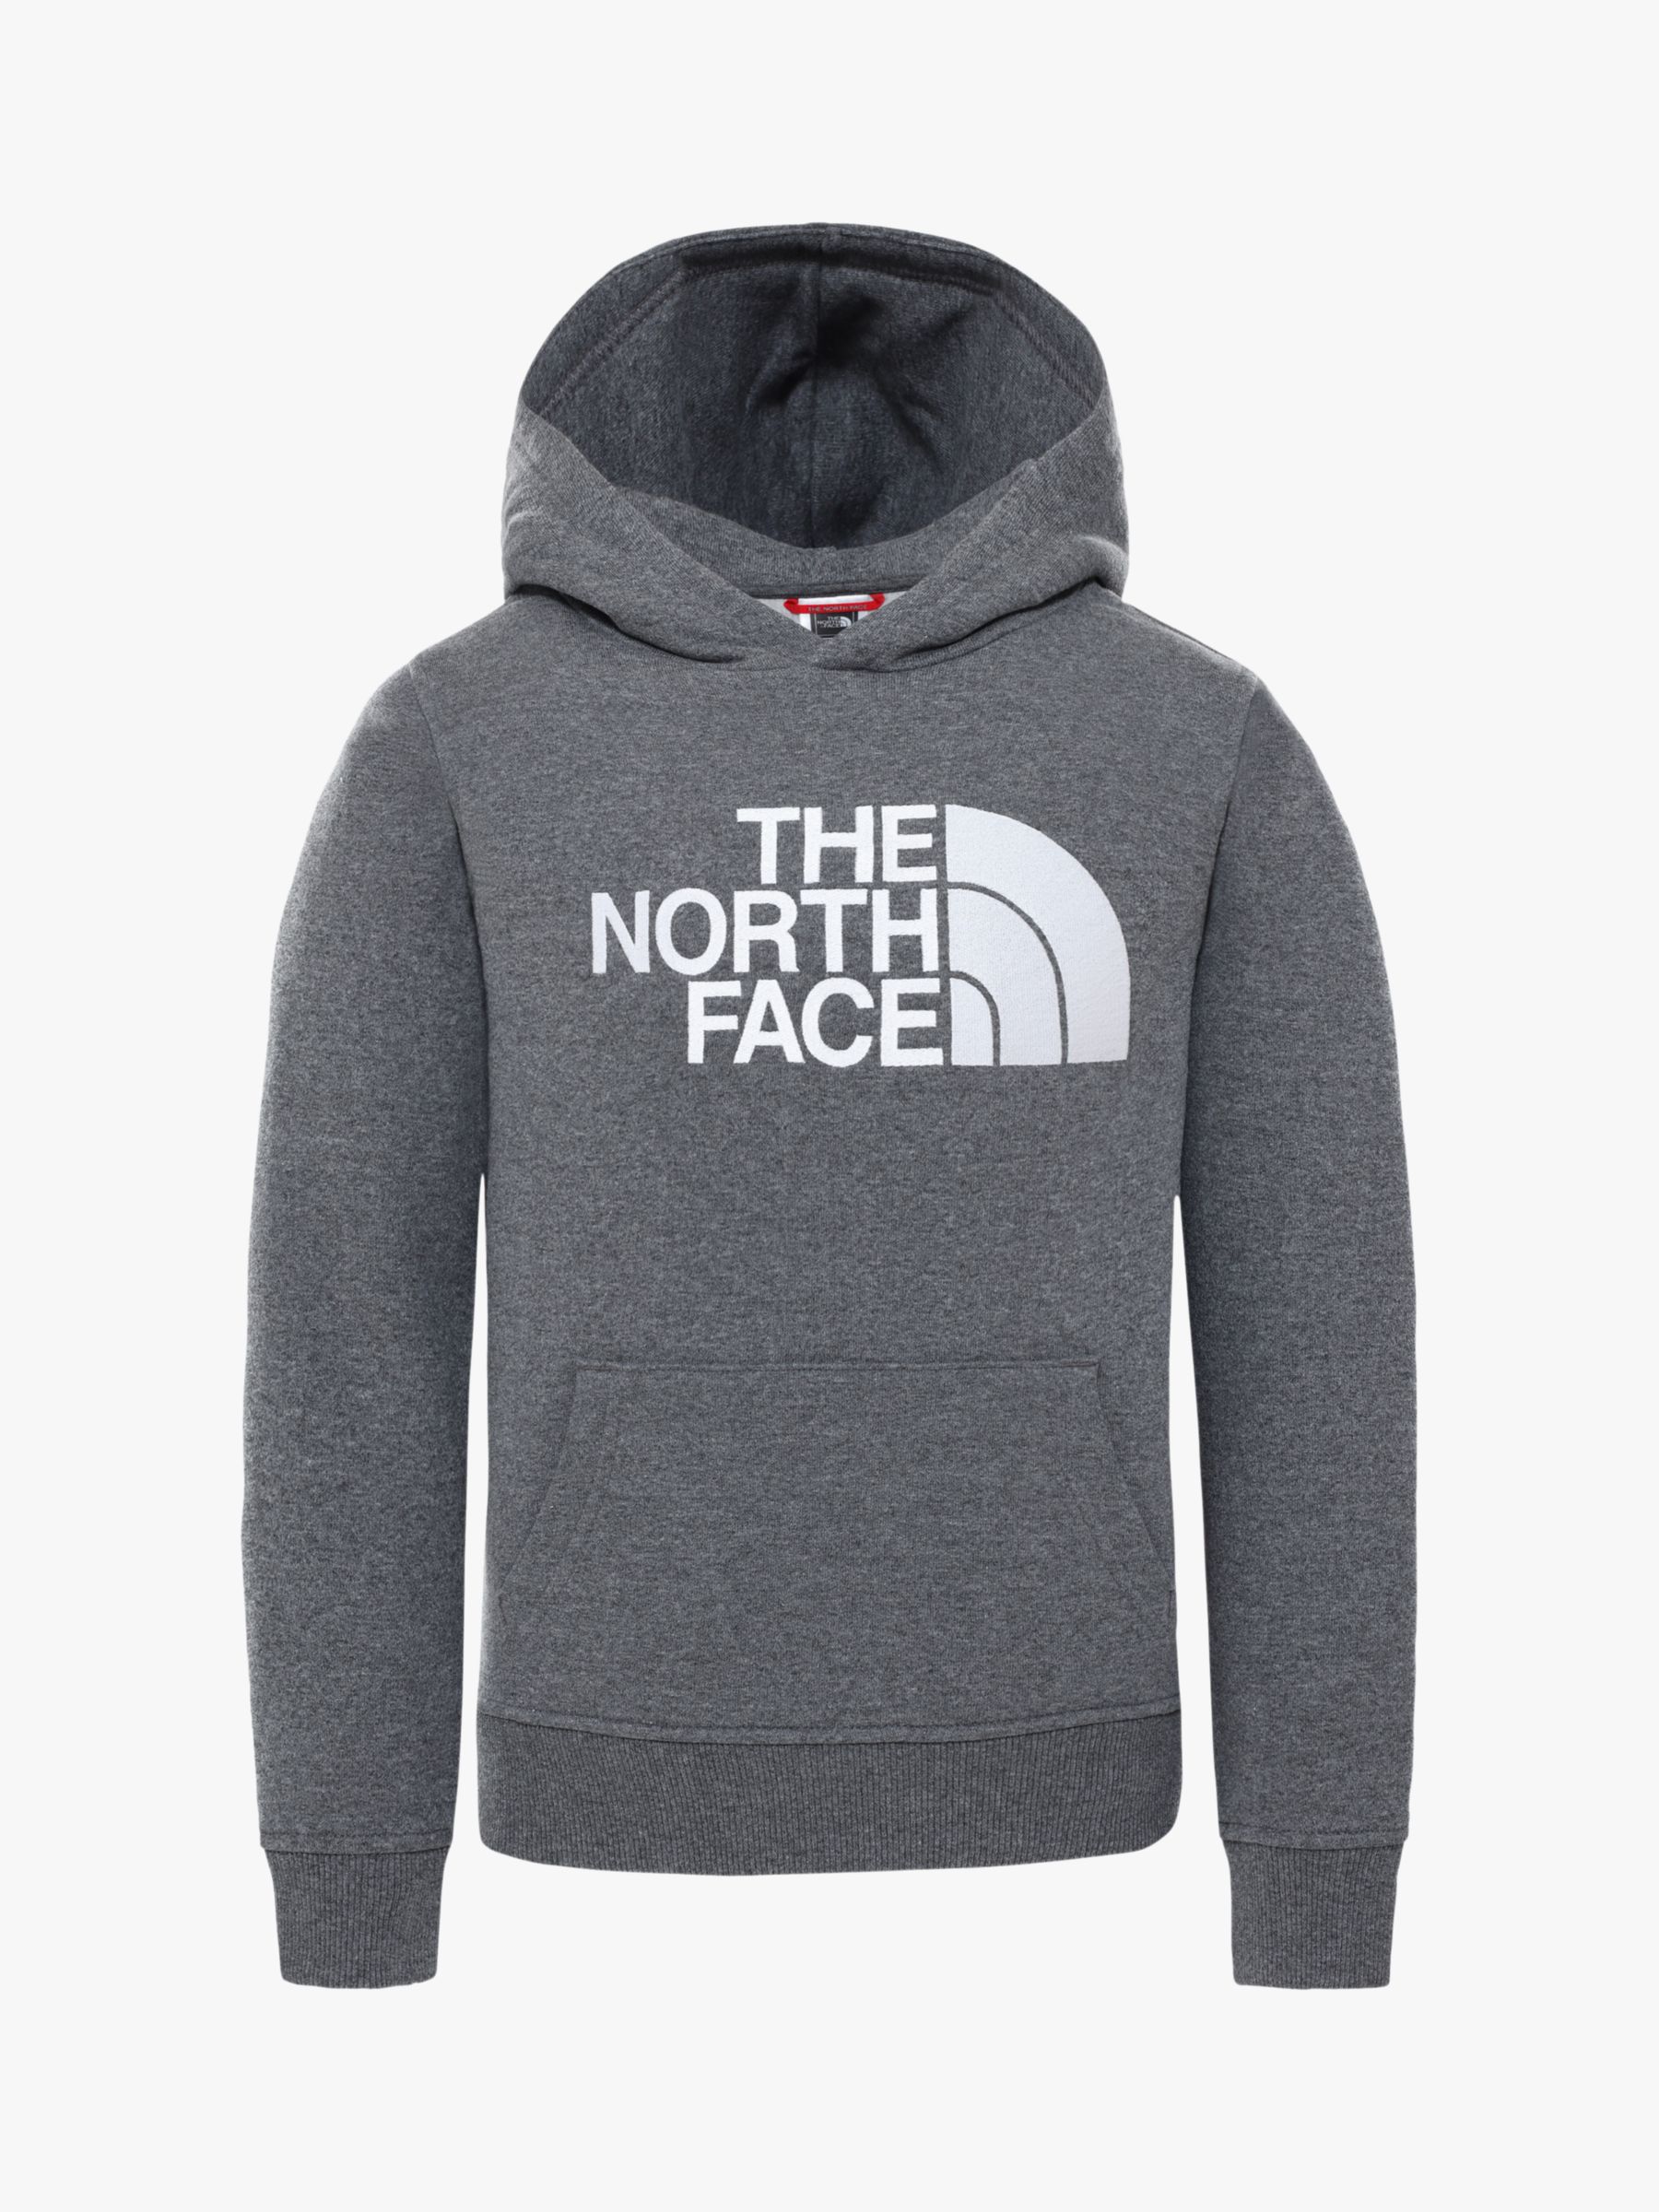 Image of The North Face Boys Drew Logo Hoodie Light Grey